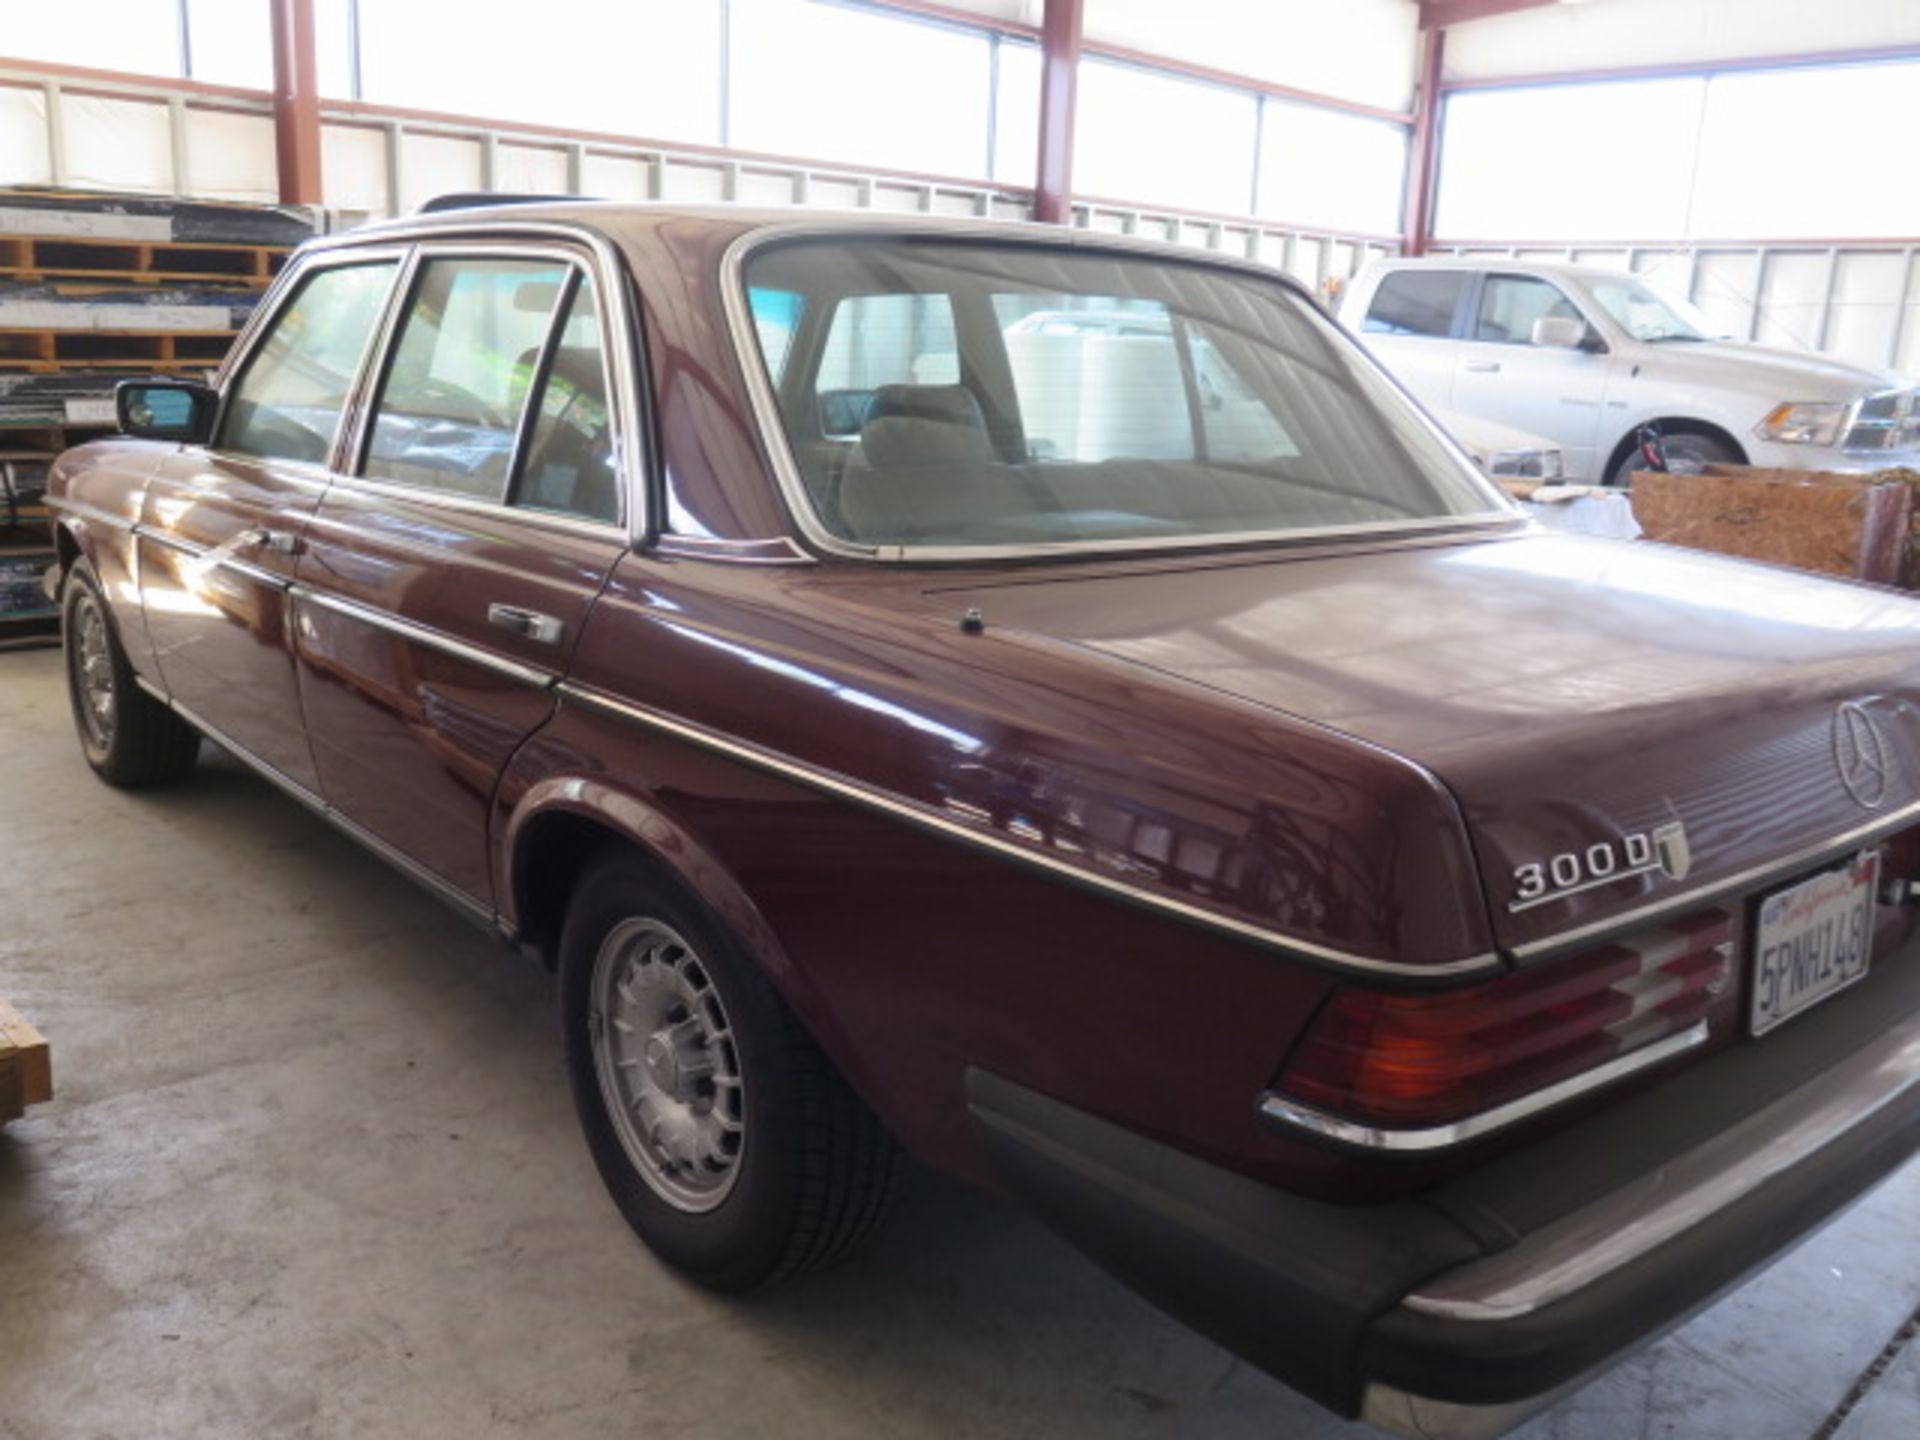 1984 Mercedes 300 Turbo Diesel 4-Door Coupe Lisc 5PNH148 w/ 3L Diesel, Auto Trans, 236, SOLD AS IS